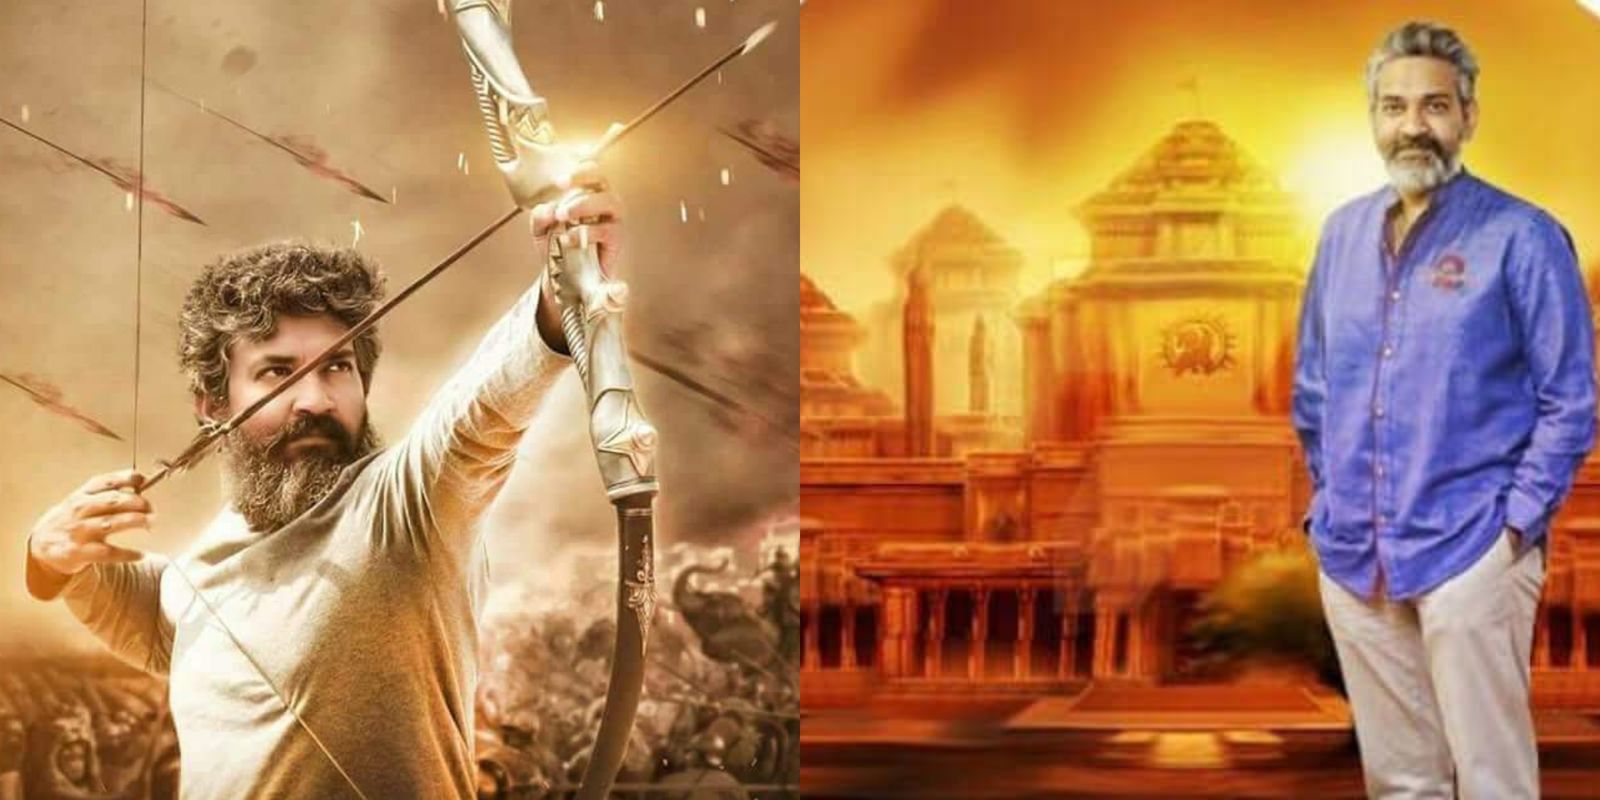 Fans Request SS Rajamouli To Break Yet Another World Record By Directing Ramayan Remake; Trend #RajamouliMakeRamayan